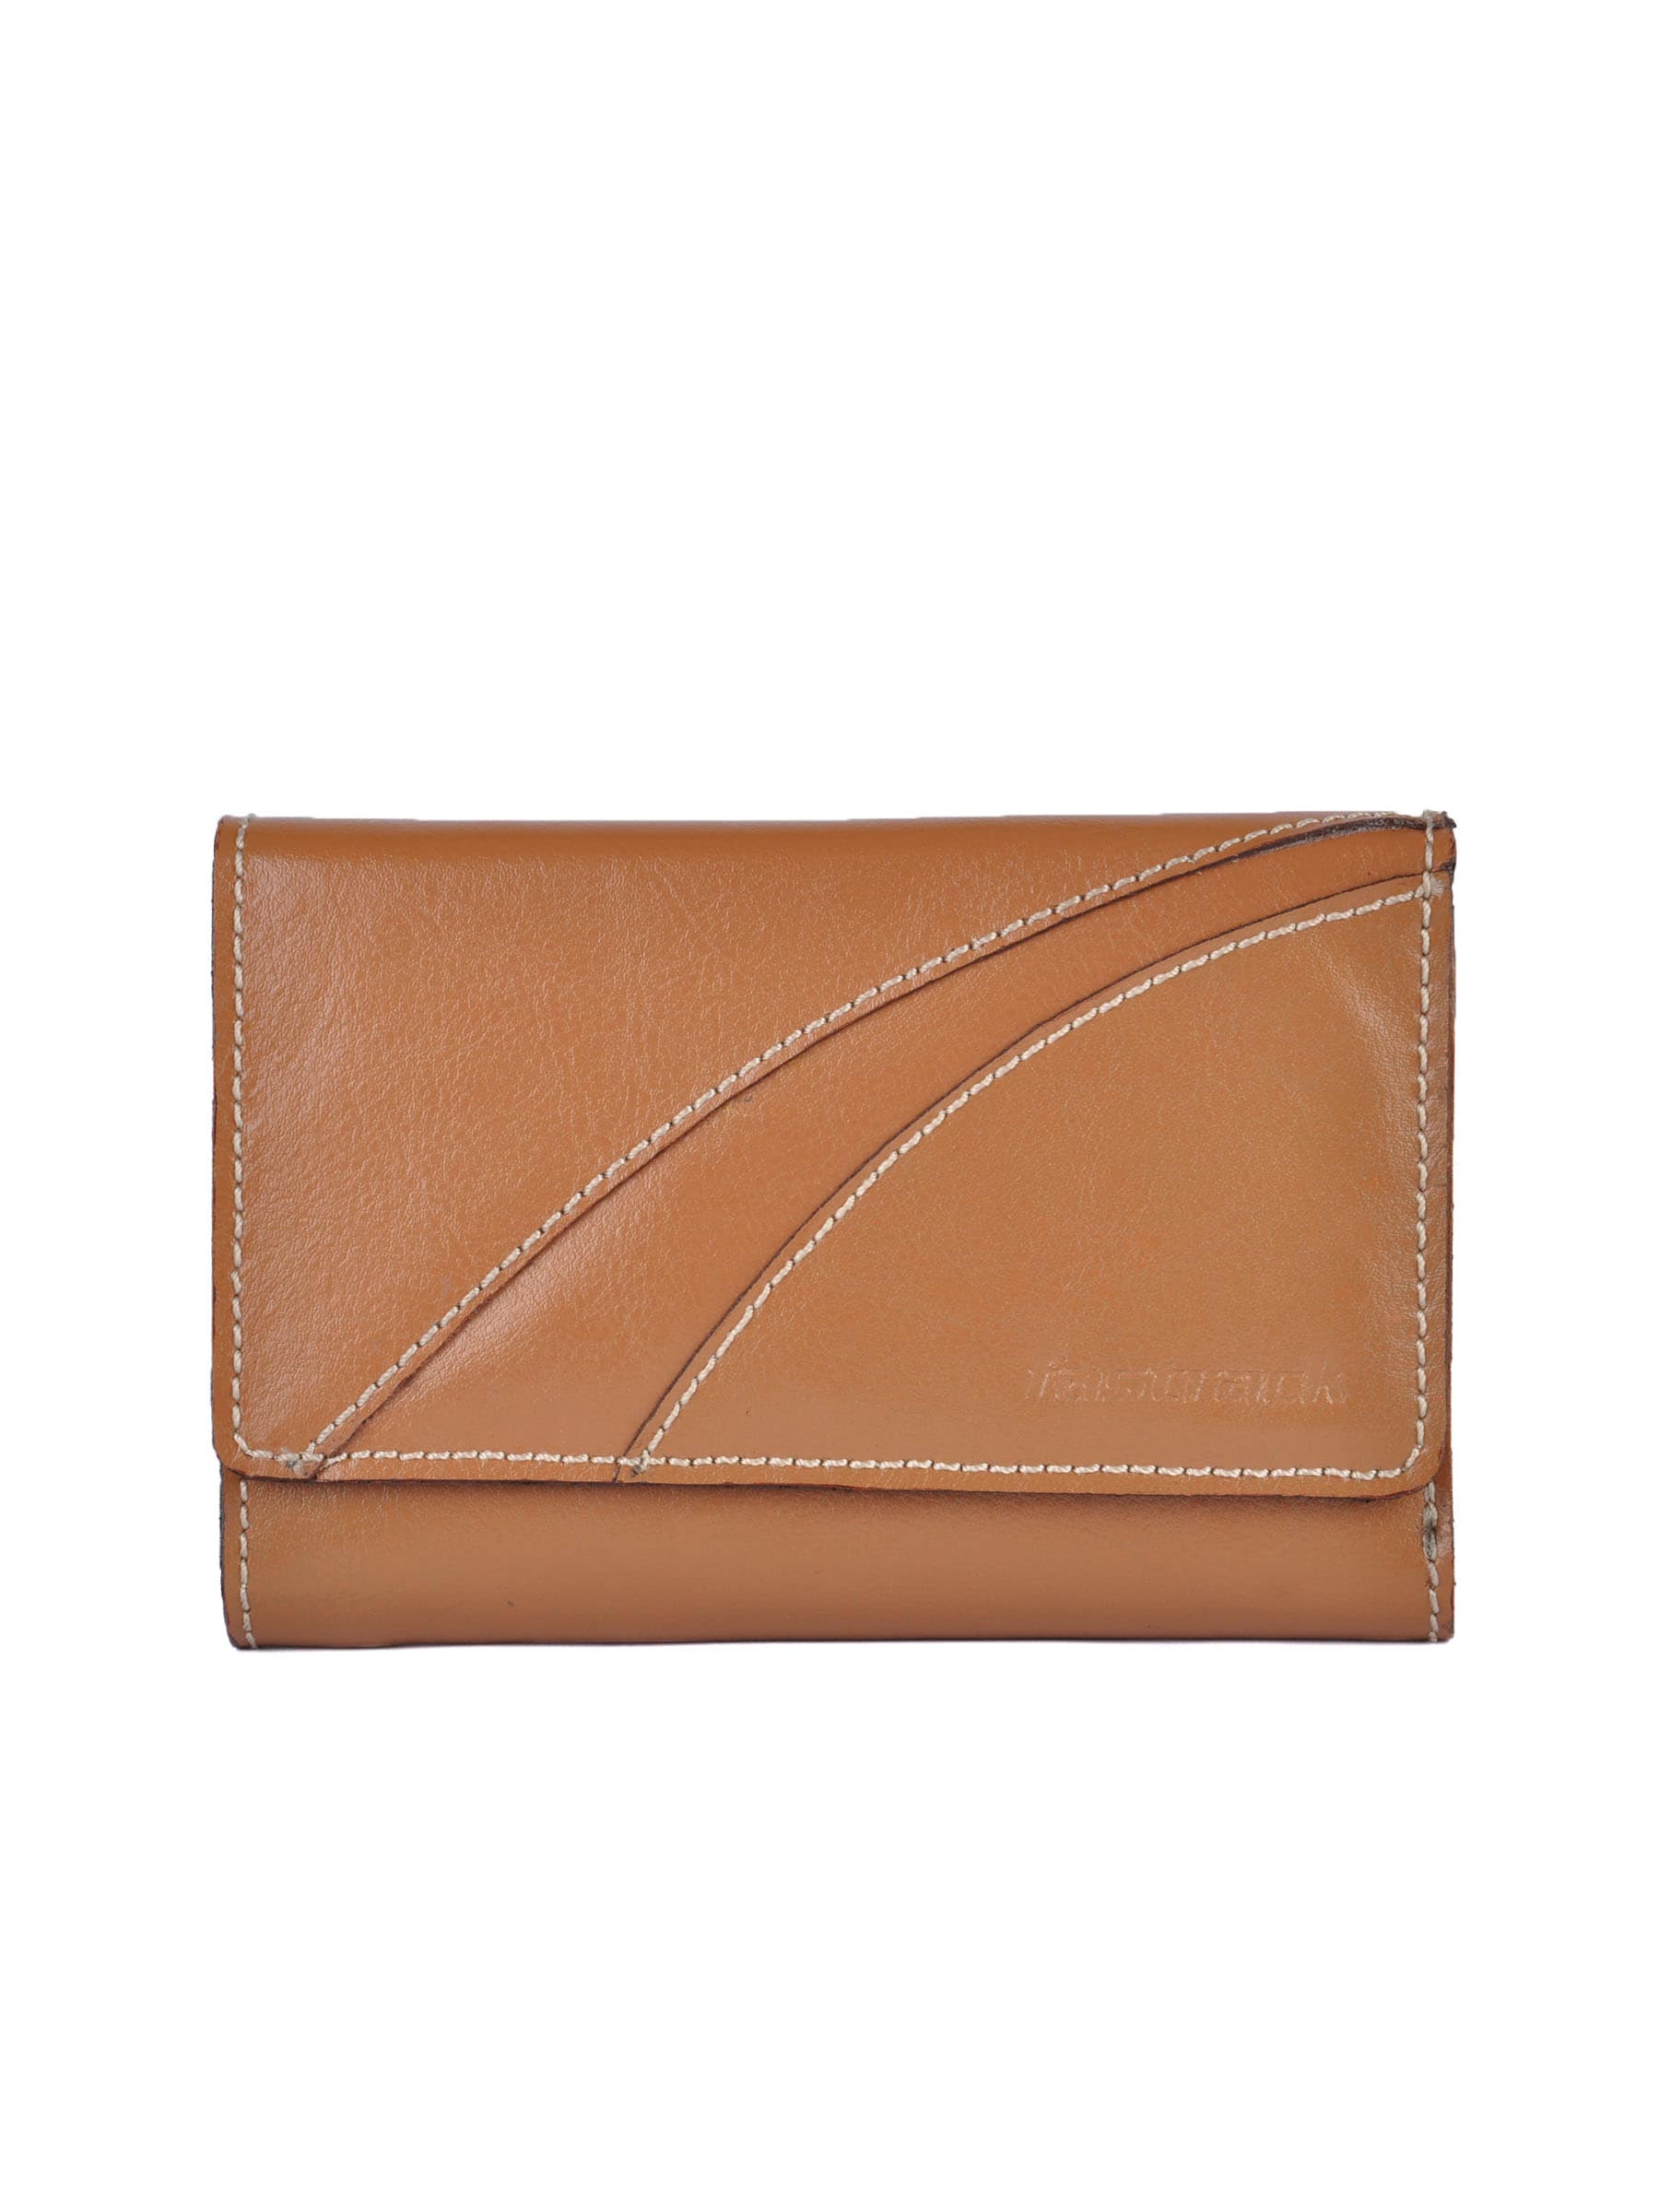 Fastrack Women Leather Brown Wallet